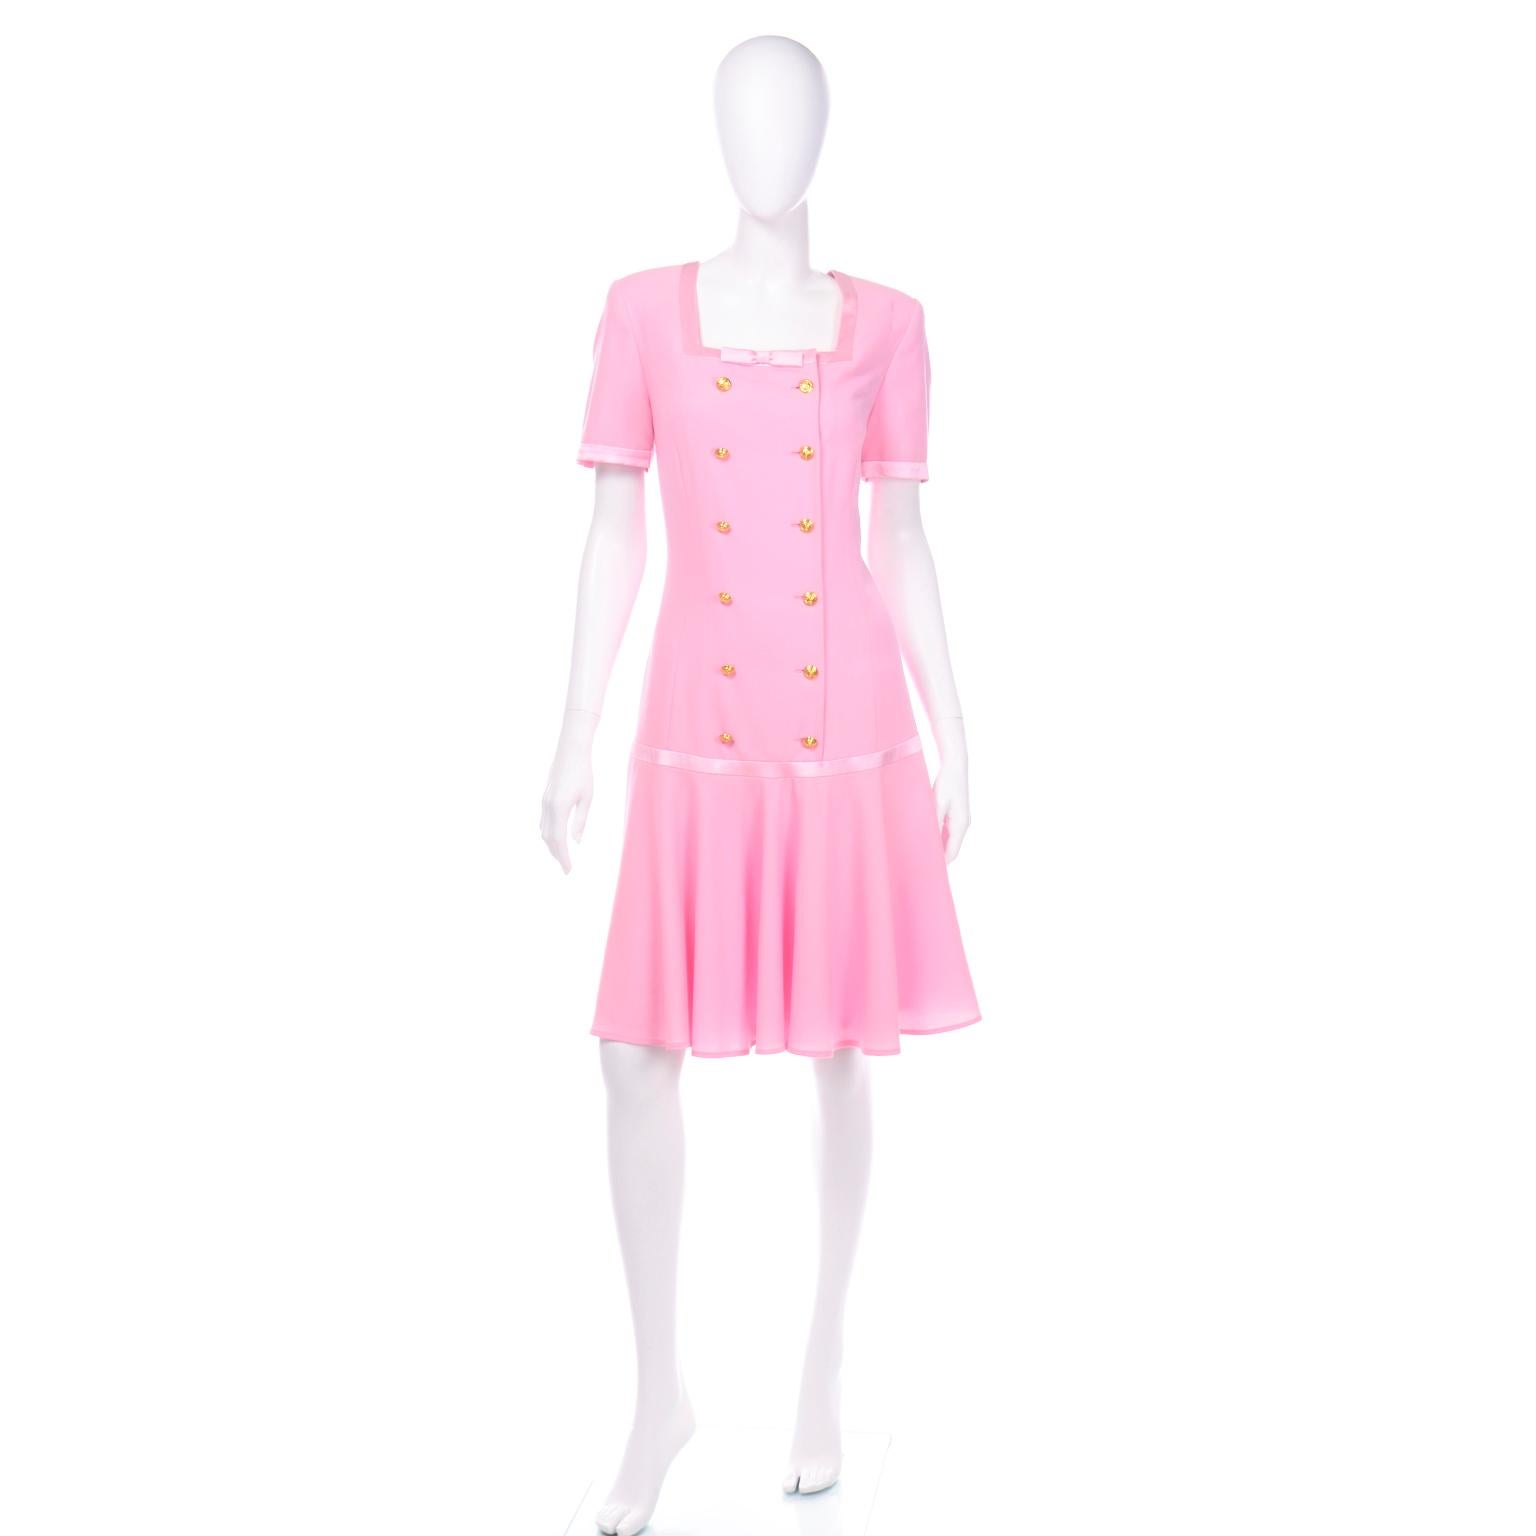 We think this  incredible vintage Margaretha Ley Escada dress would be perfect for a  wedding or garden party guest. This double breasted dress is in a light pink wool with silk ribbon trim and gold tone rose engraved buttons. The dress has a square